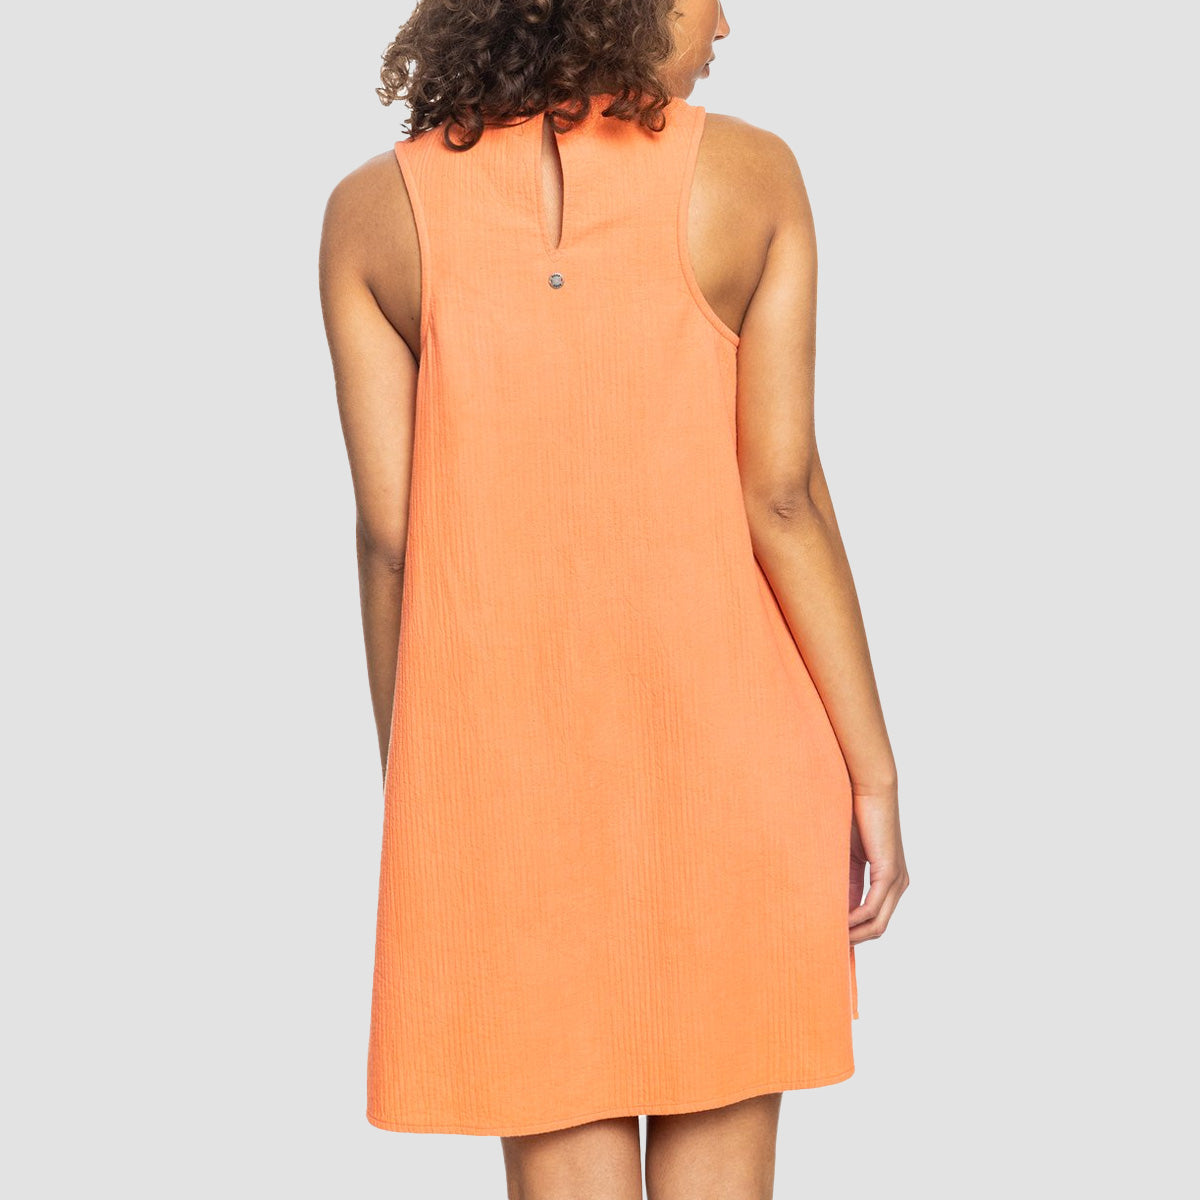 Roxy Sweet Wishes Sleeveless Dress Fusion Coral - Womens